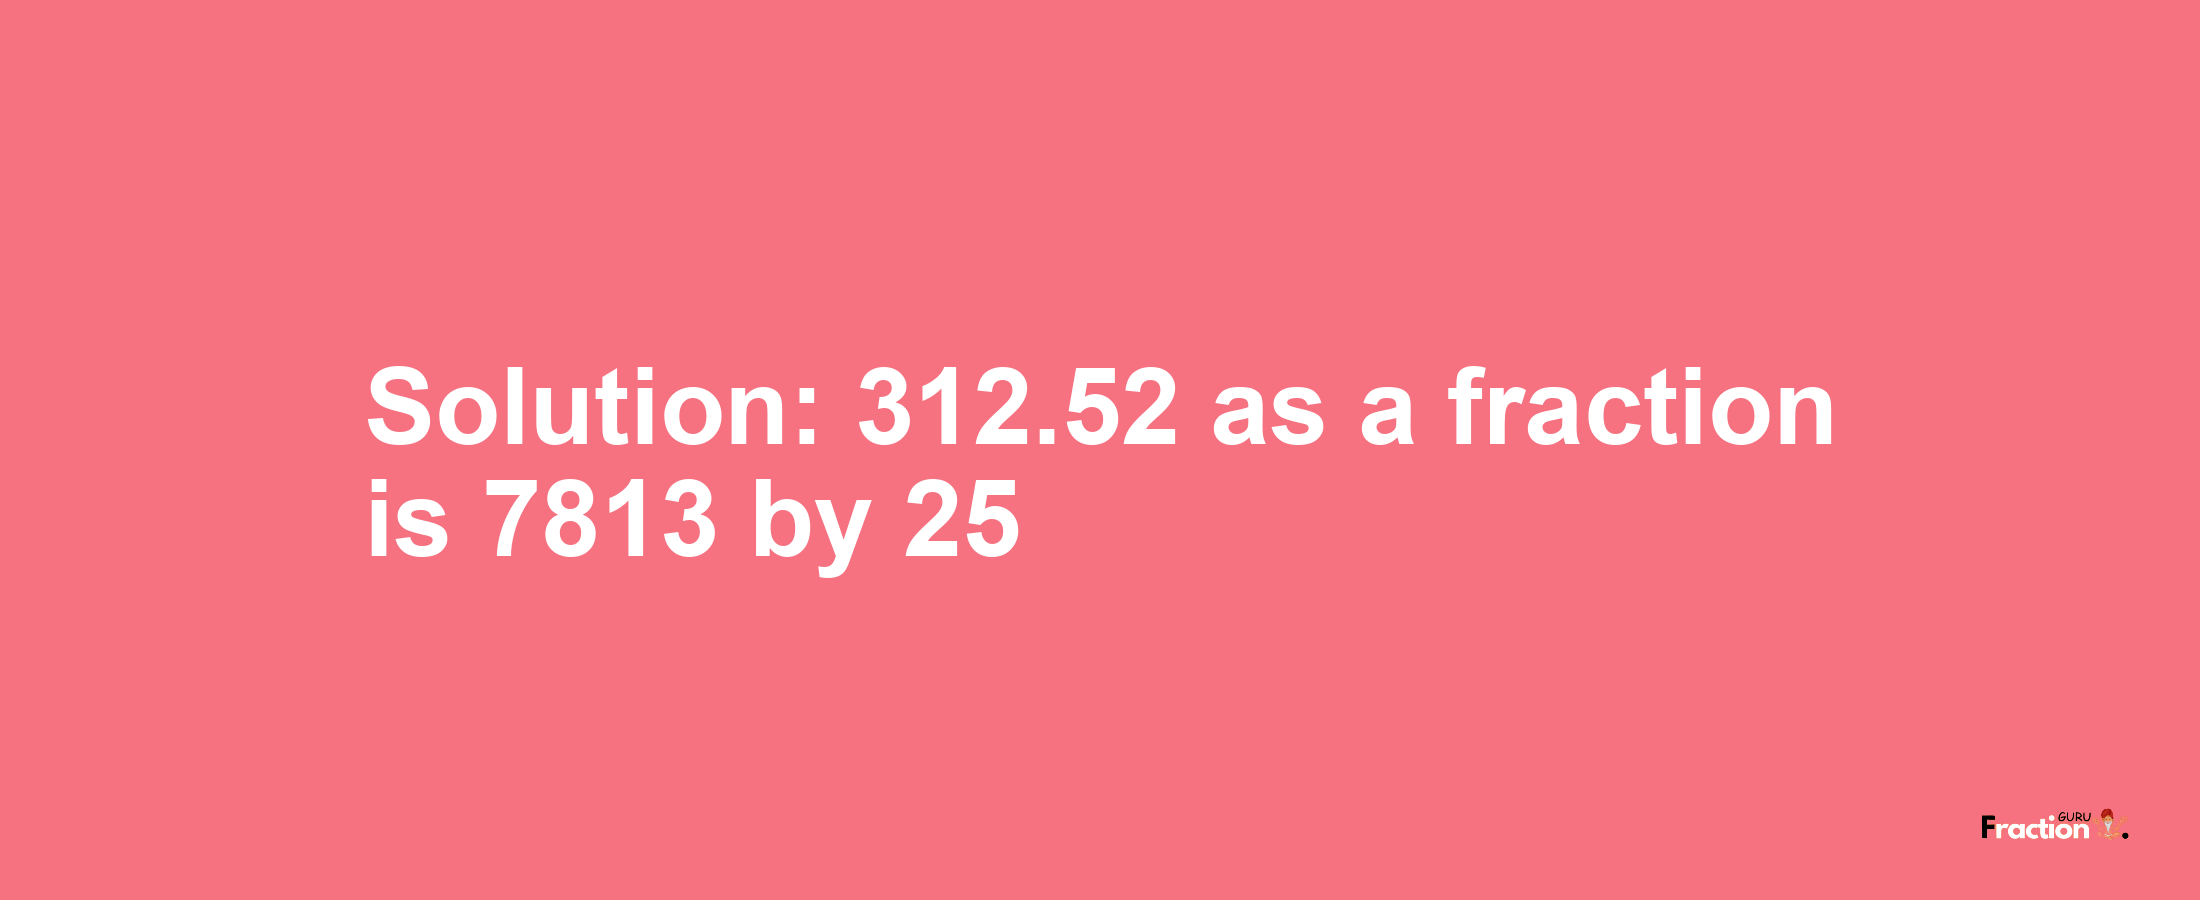 Solution:312.52 as a fraction is 7813/25